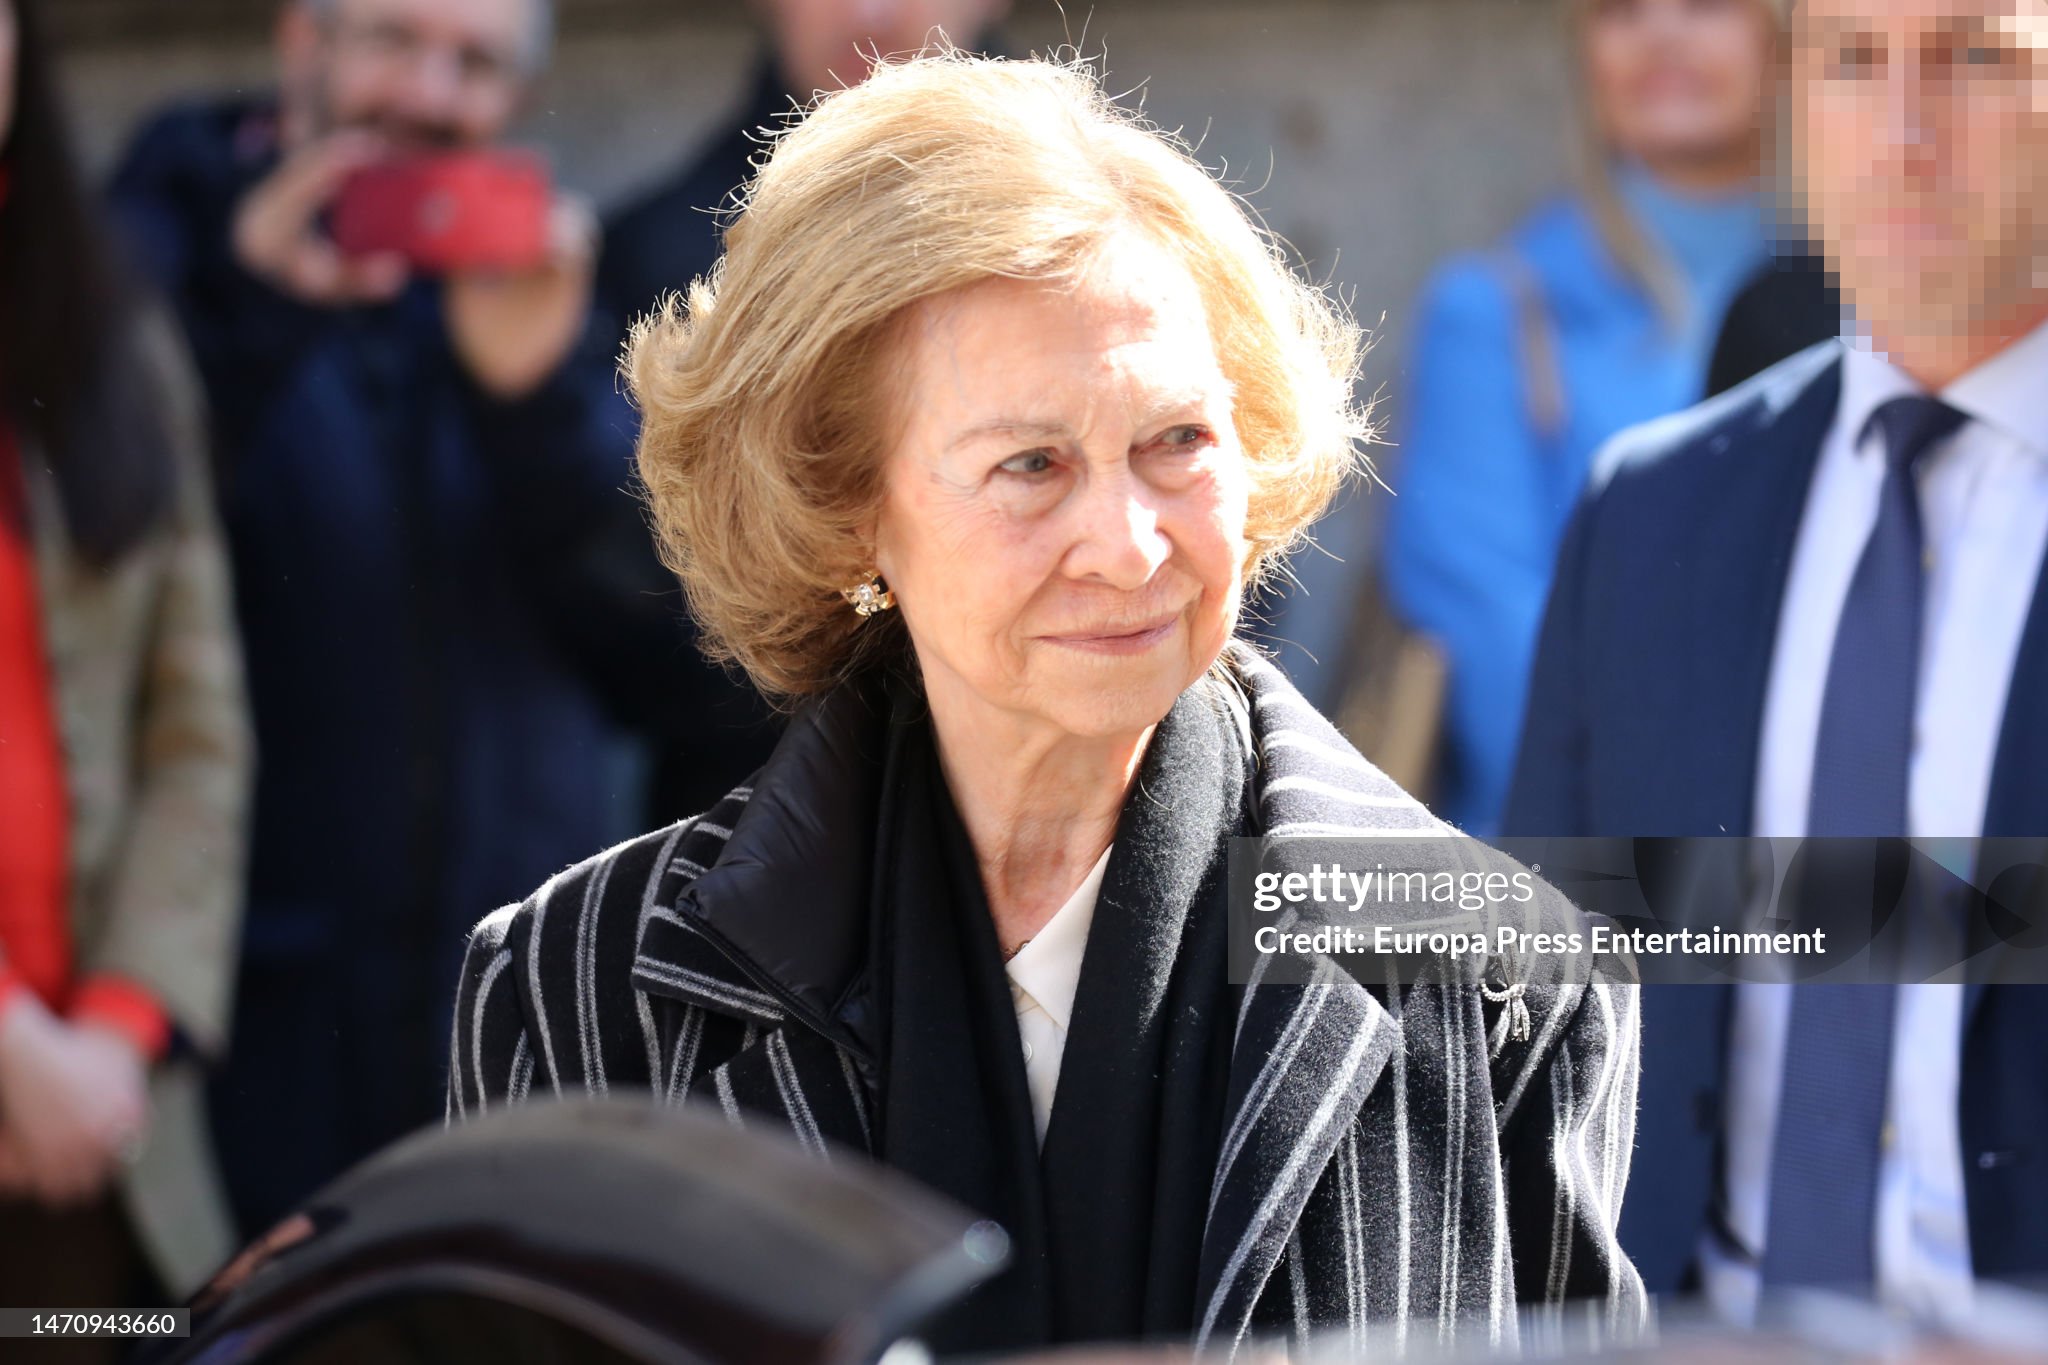 queen-sofia-at-the-exit-of-the-traditional-kissing-of-jesus-of-medinaceli-on-march-3-in-madrid.jpg